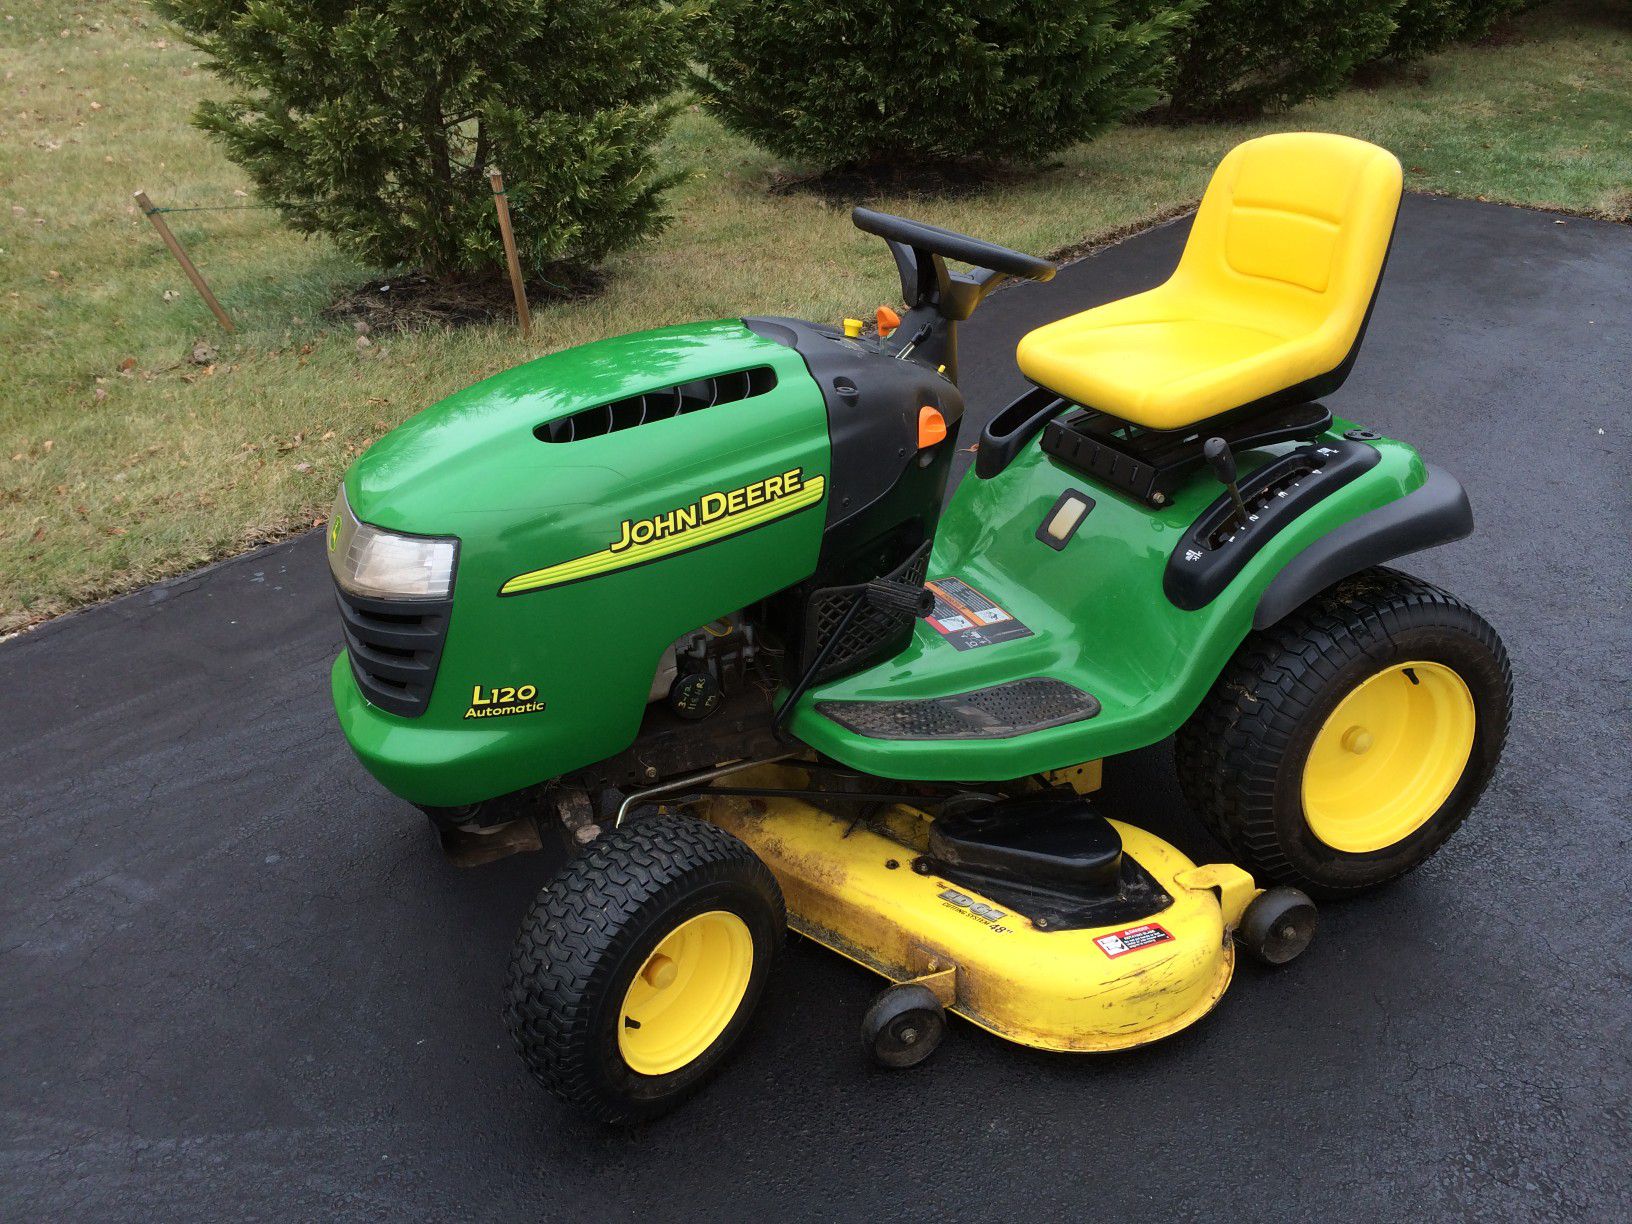 John Deere L120 with Cart and Leaf blower/bag